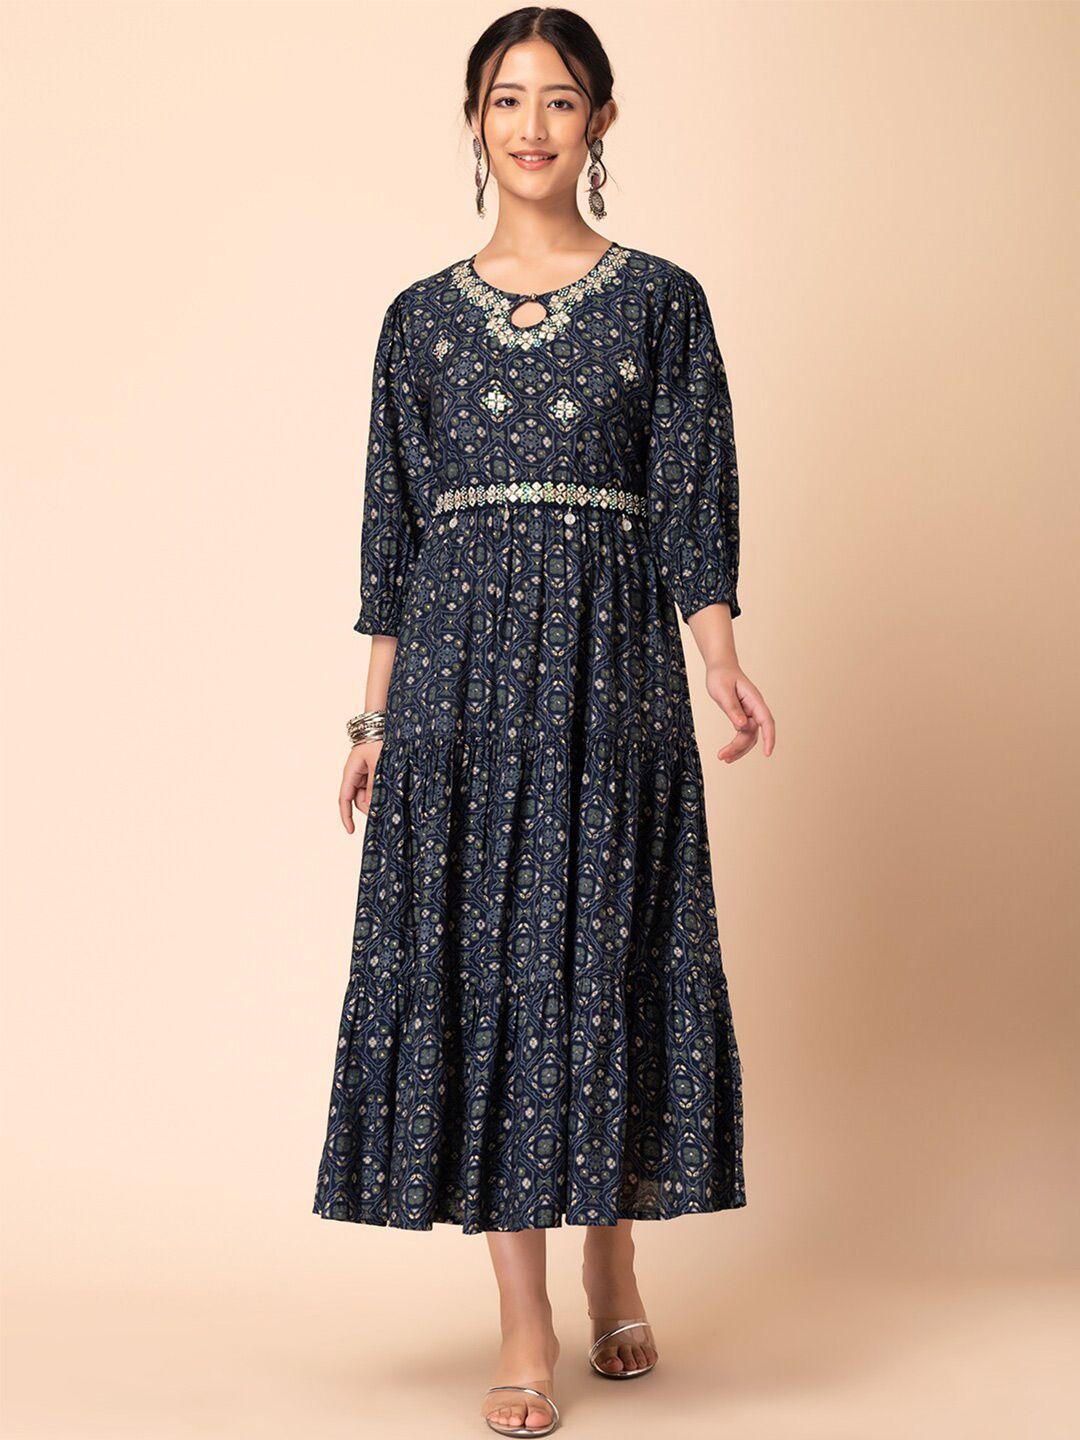 rang by indya embroidered chanderi dress with belt